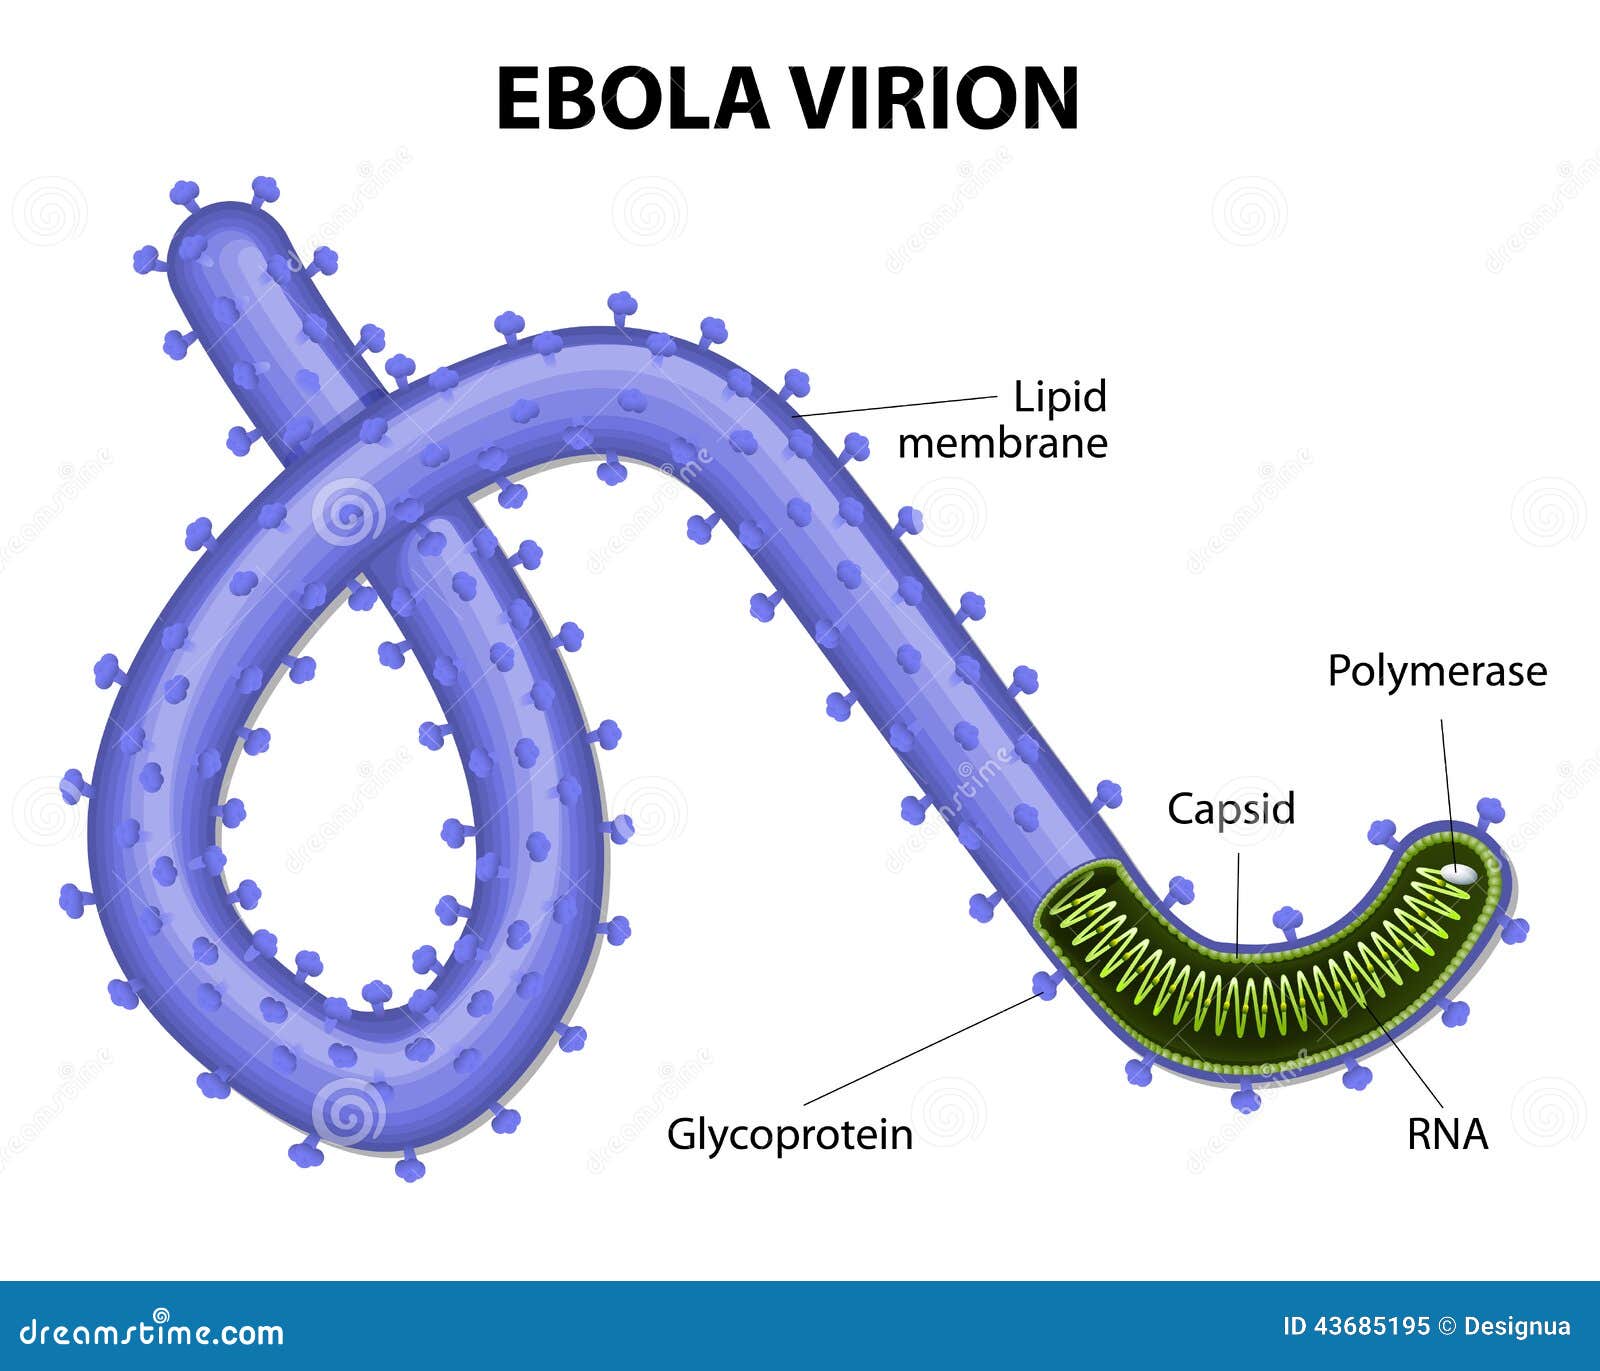 Illustration of the structure of the ebola virus